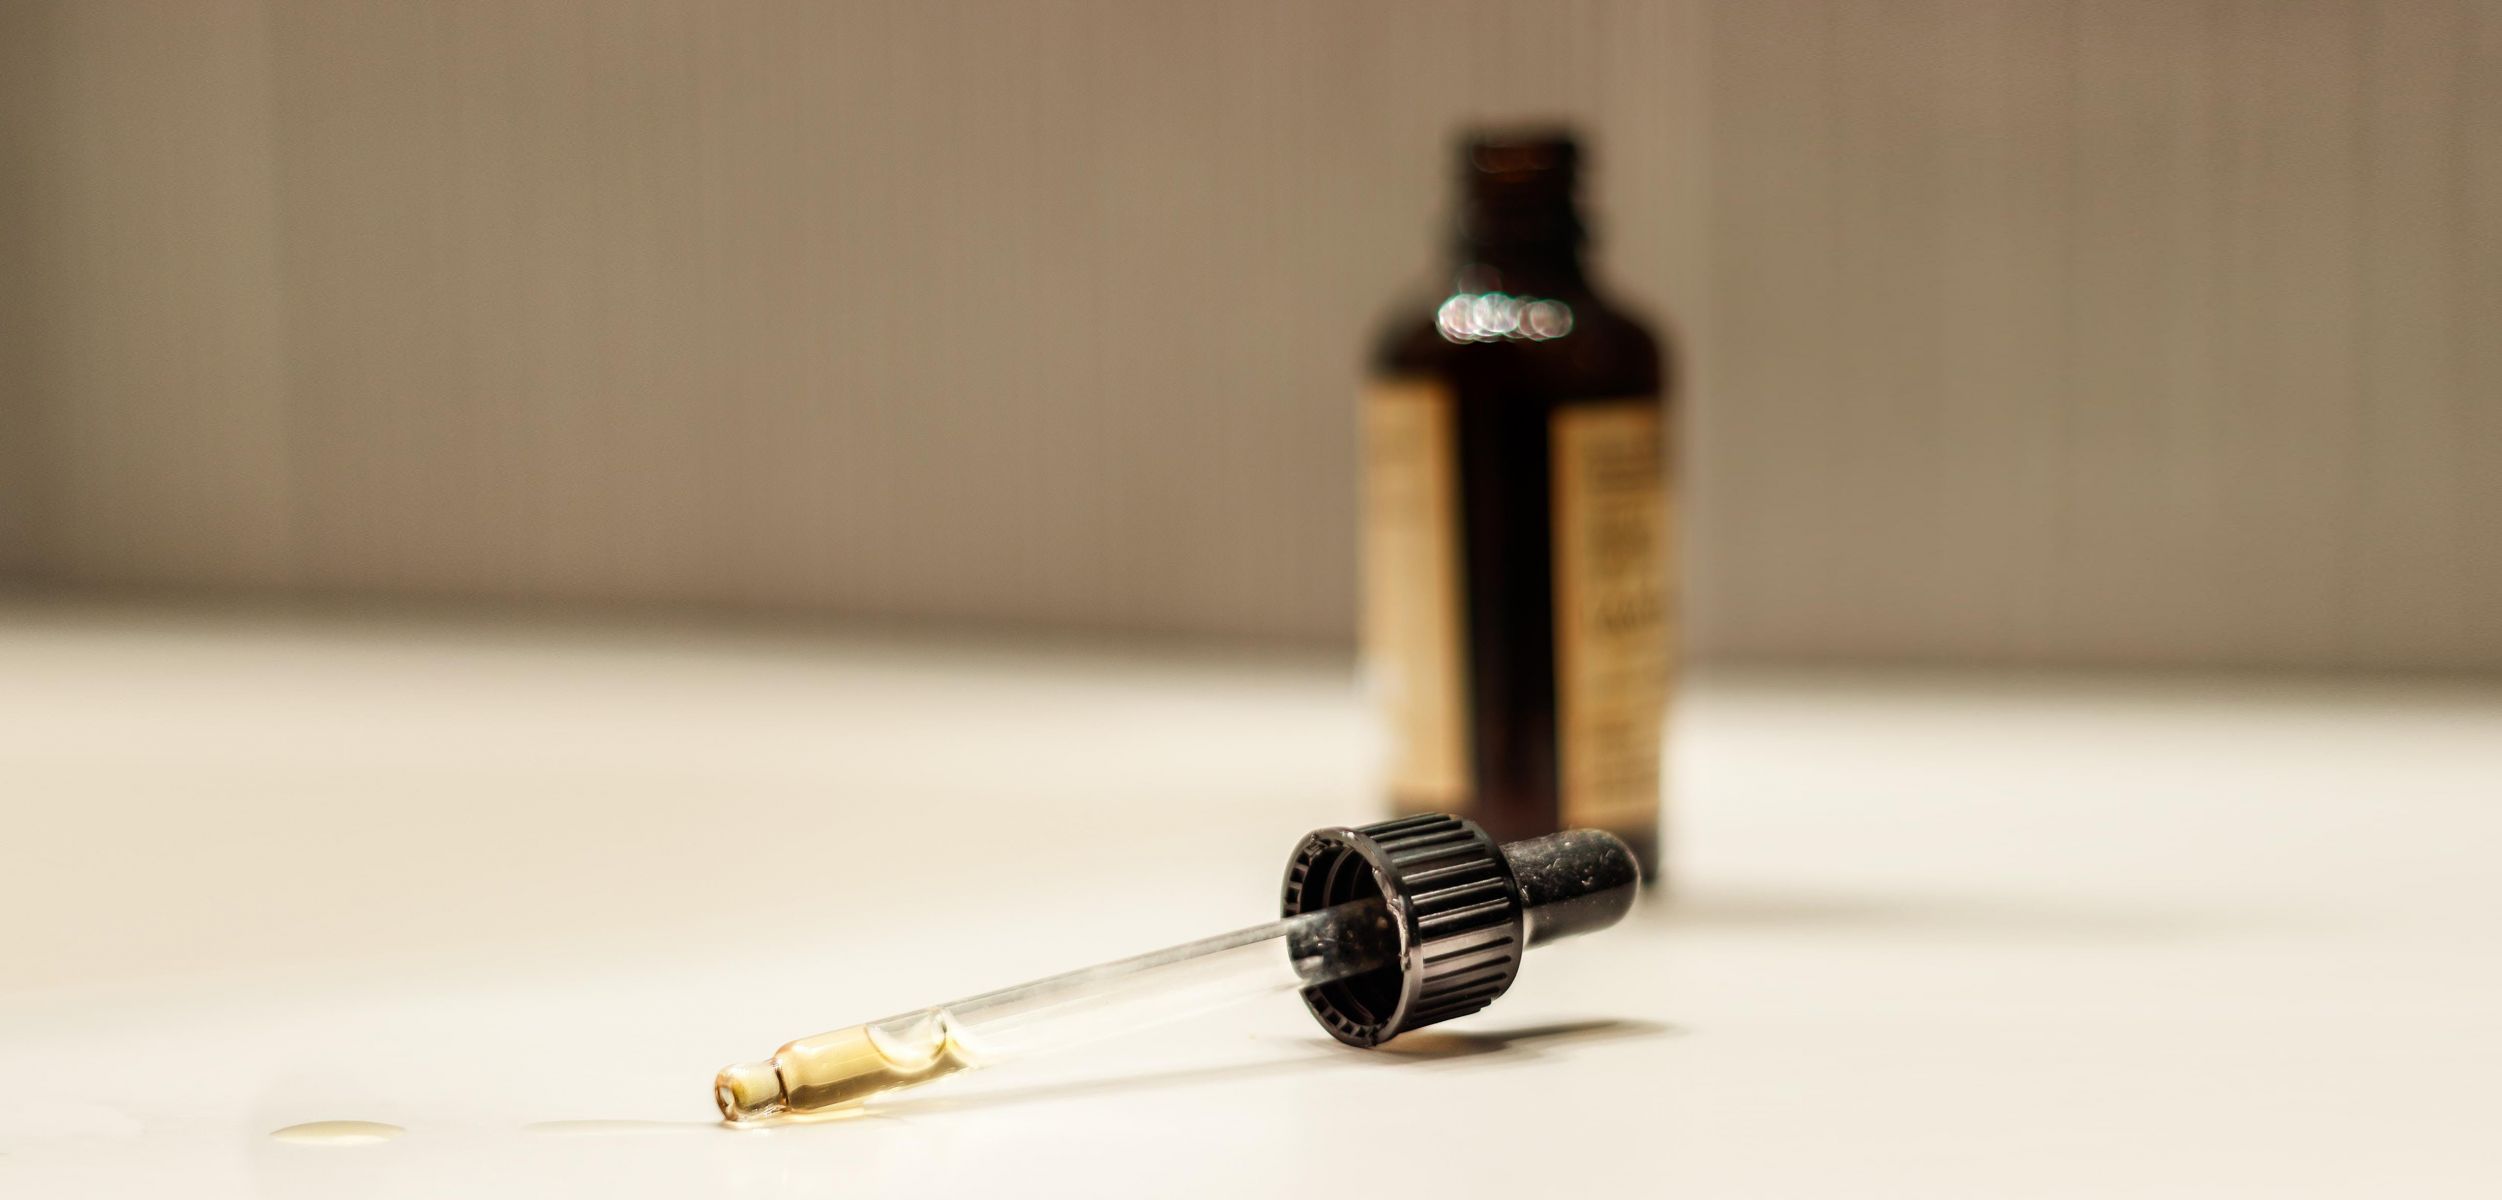 A CBD oil tincture dropper with few drops of CBD oil in it on a blurry background of an opened brown CBD oil tincture bottle